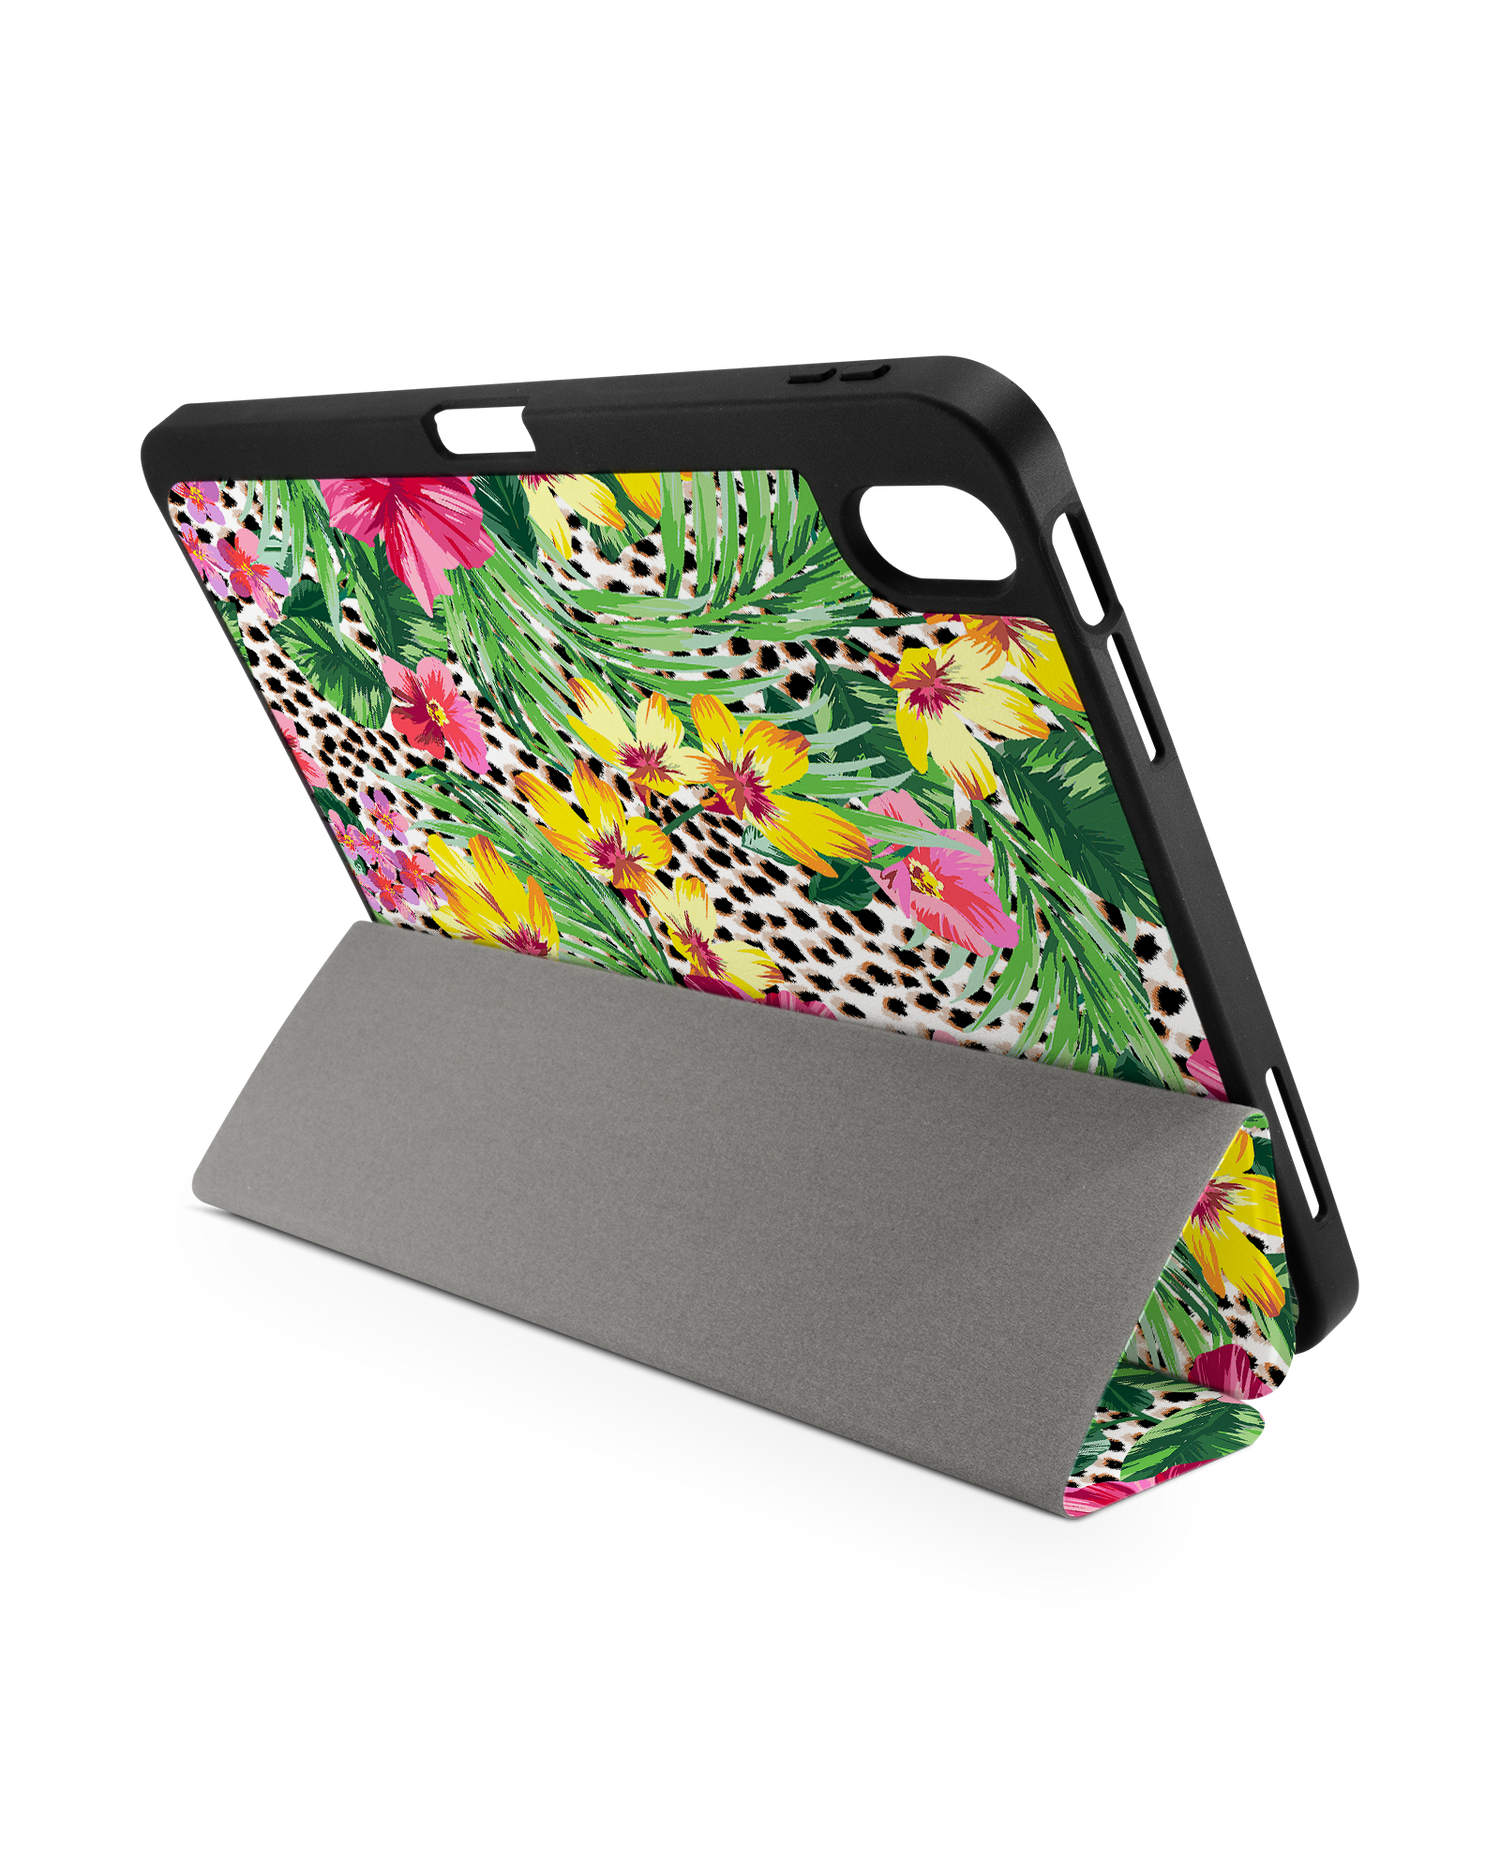 Tropical Cheetah iPad Case with Pencil Holder for Apple iPad (10th Generation): Set up in landscape format (back view)